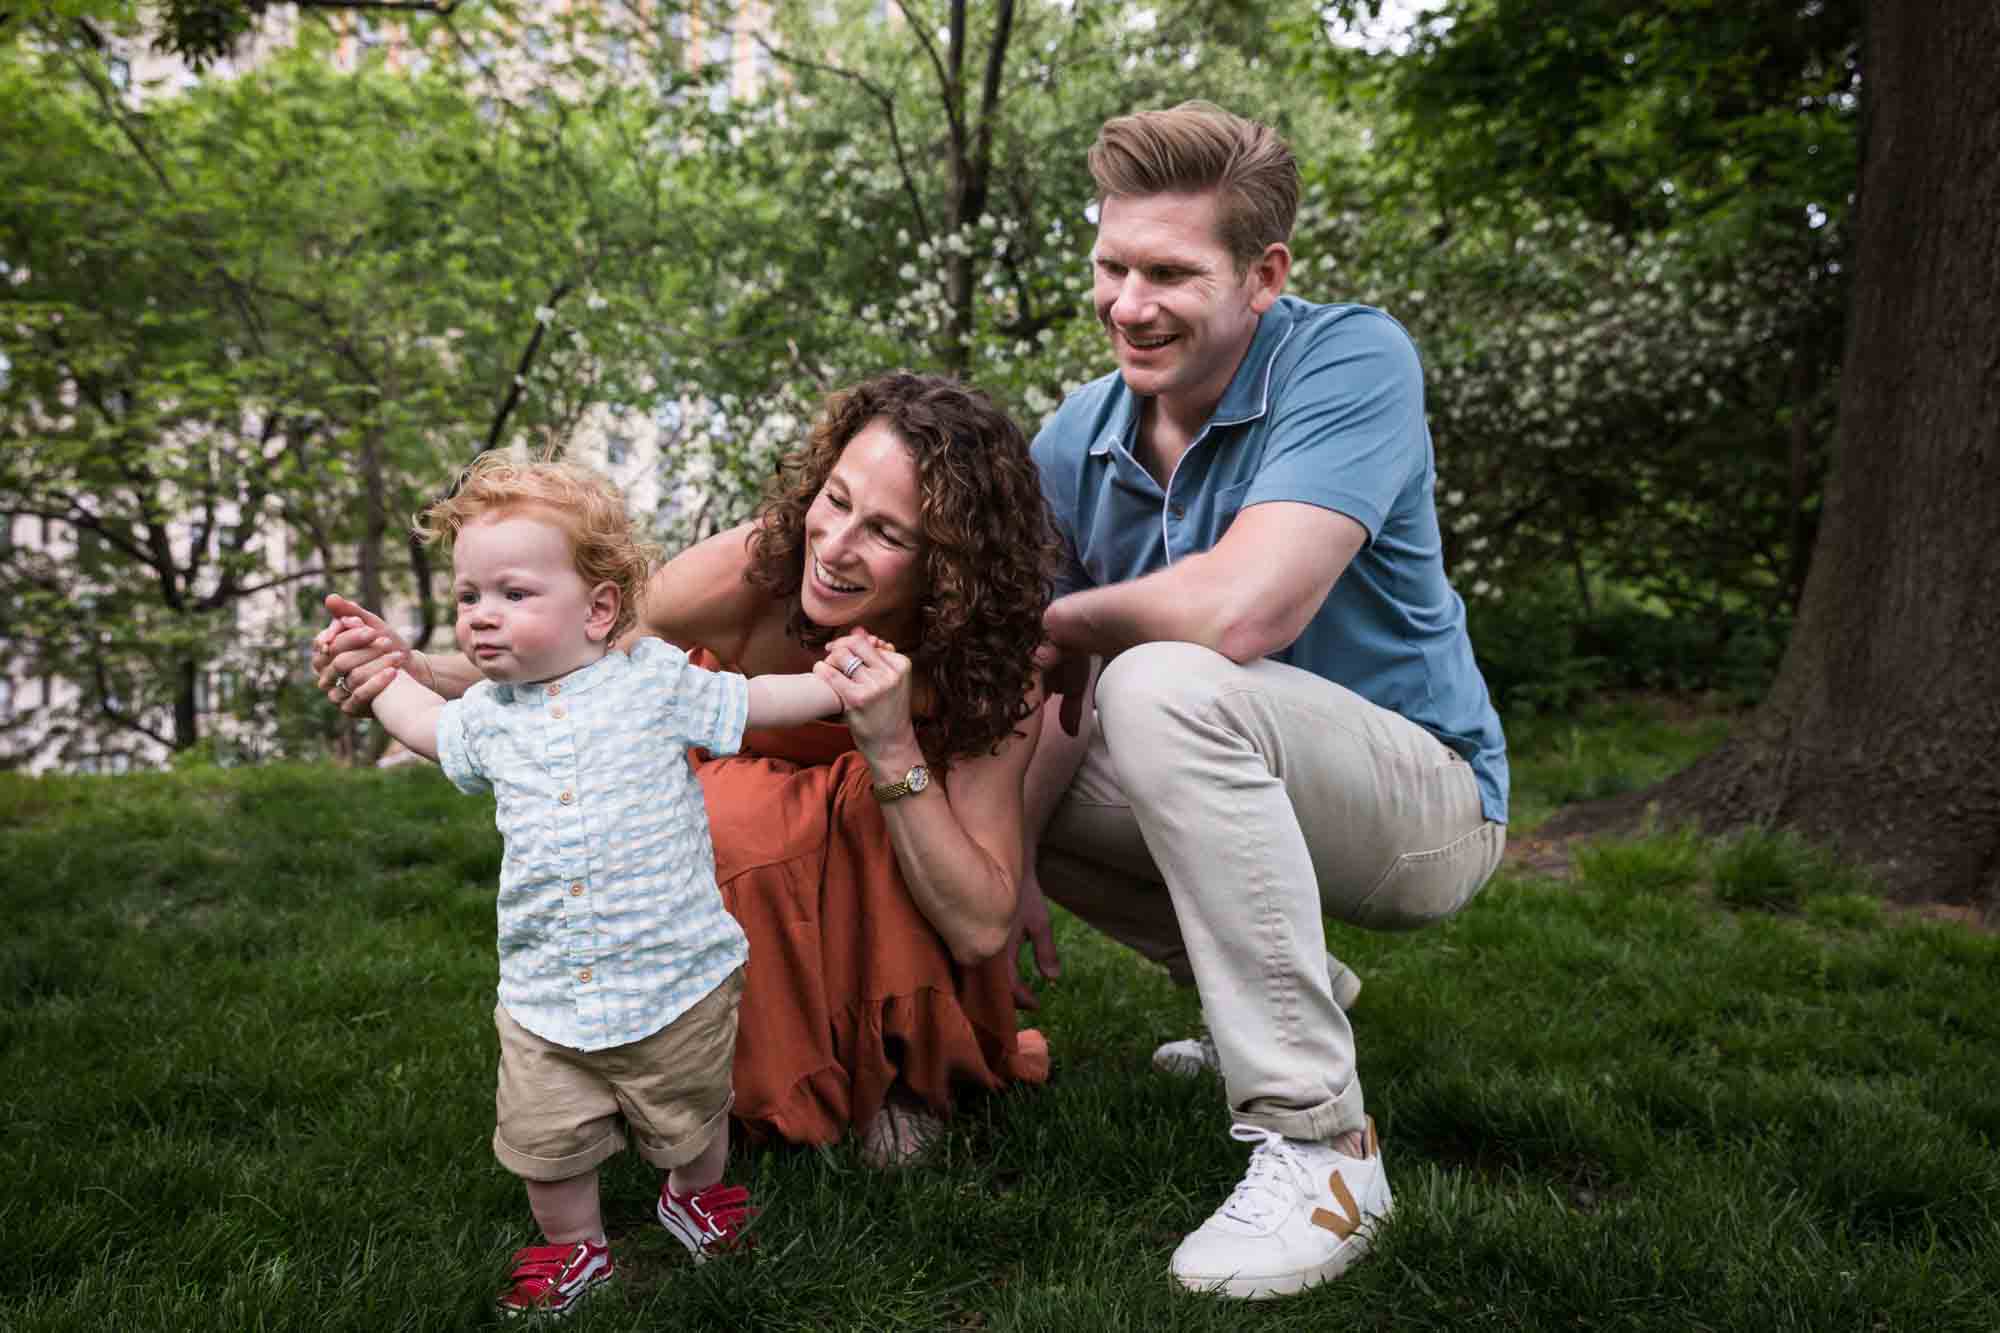 Mother and father helping red-haired baby boy walk in grass during a Central Park family portrait session